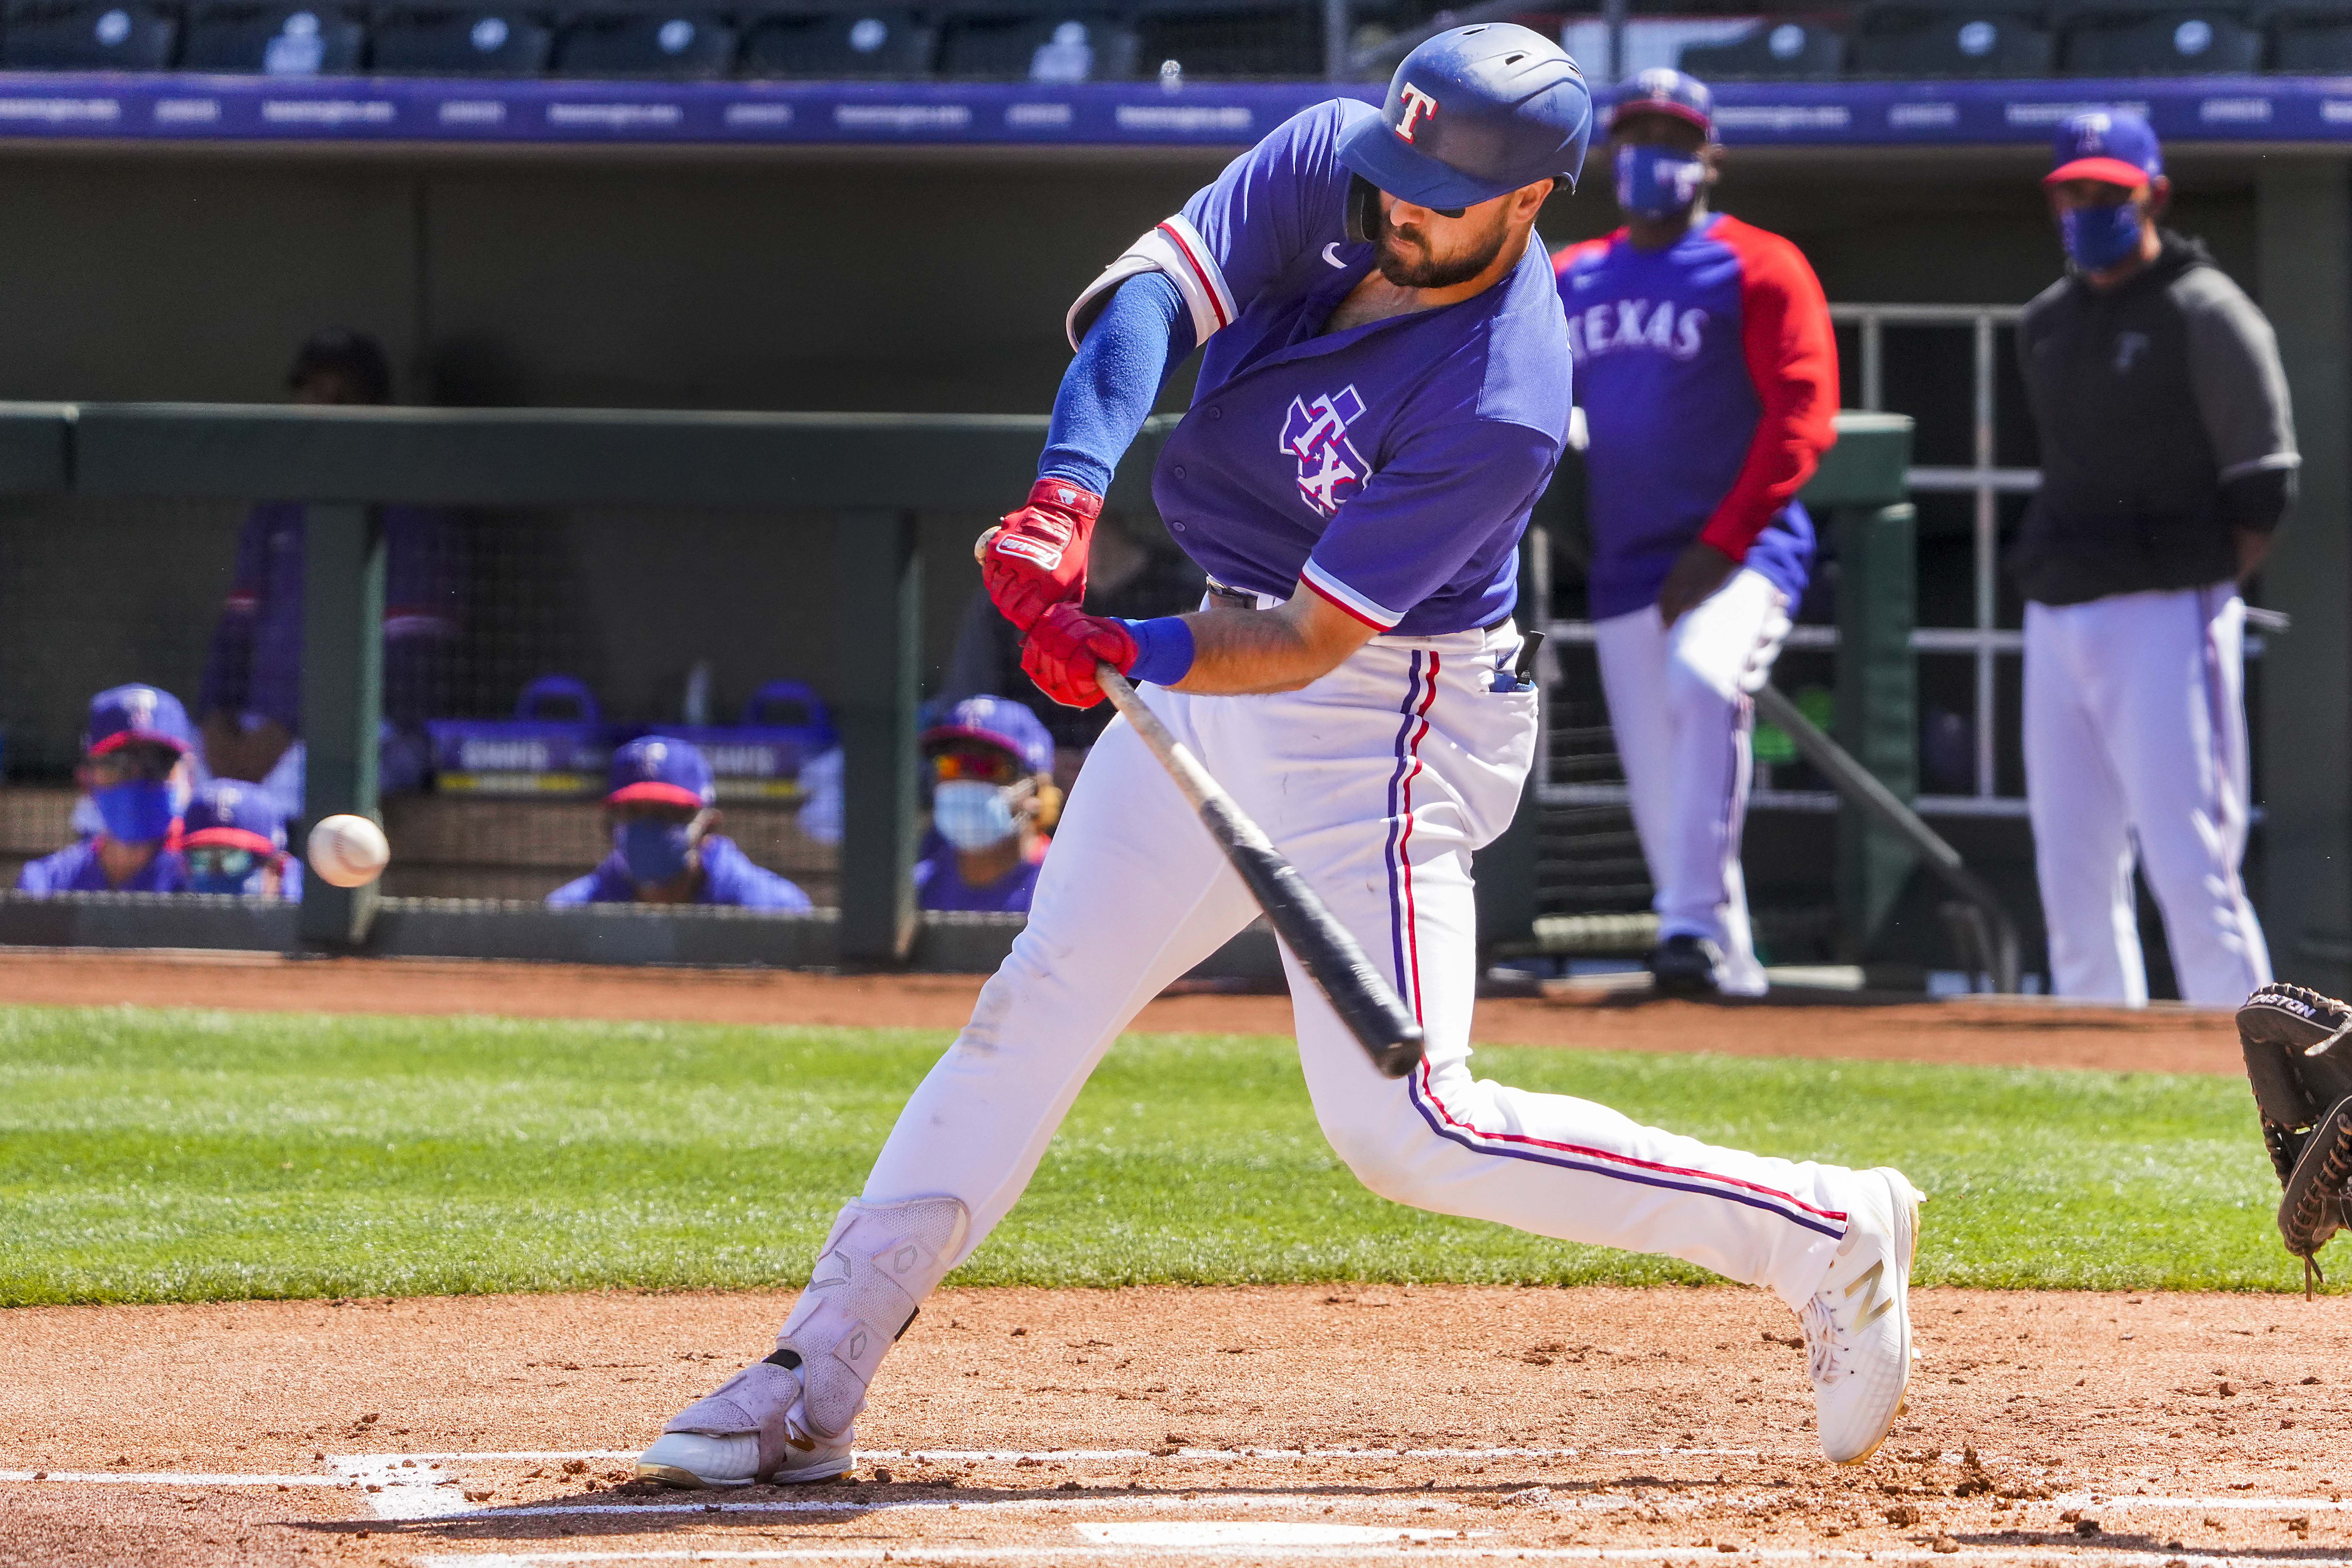 Joey Gallo hits fifth homer of Spring Training